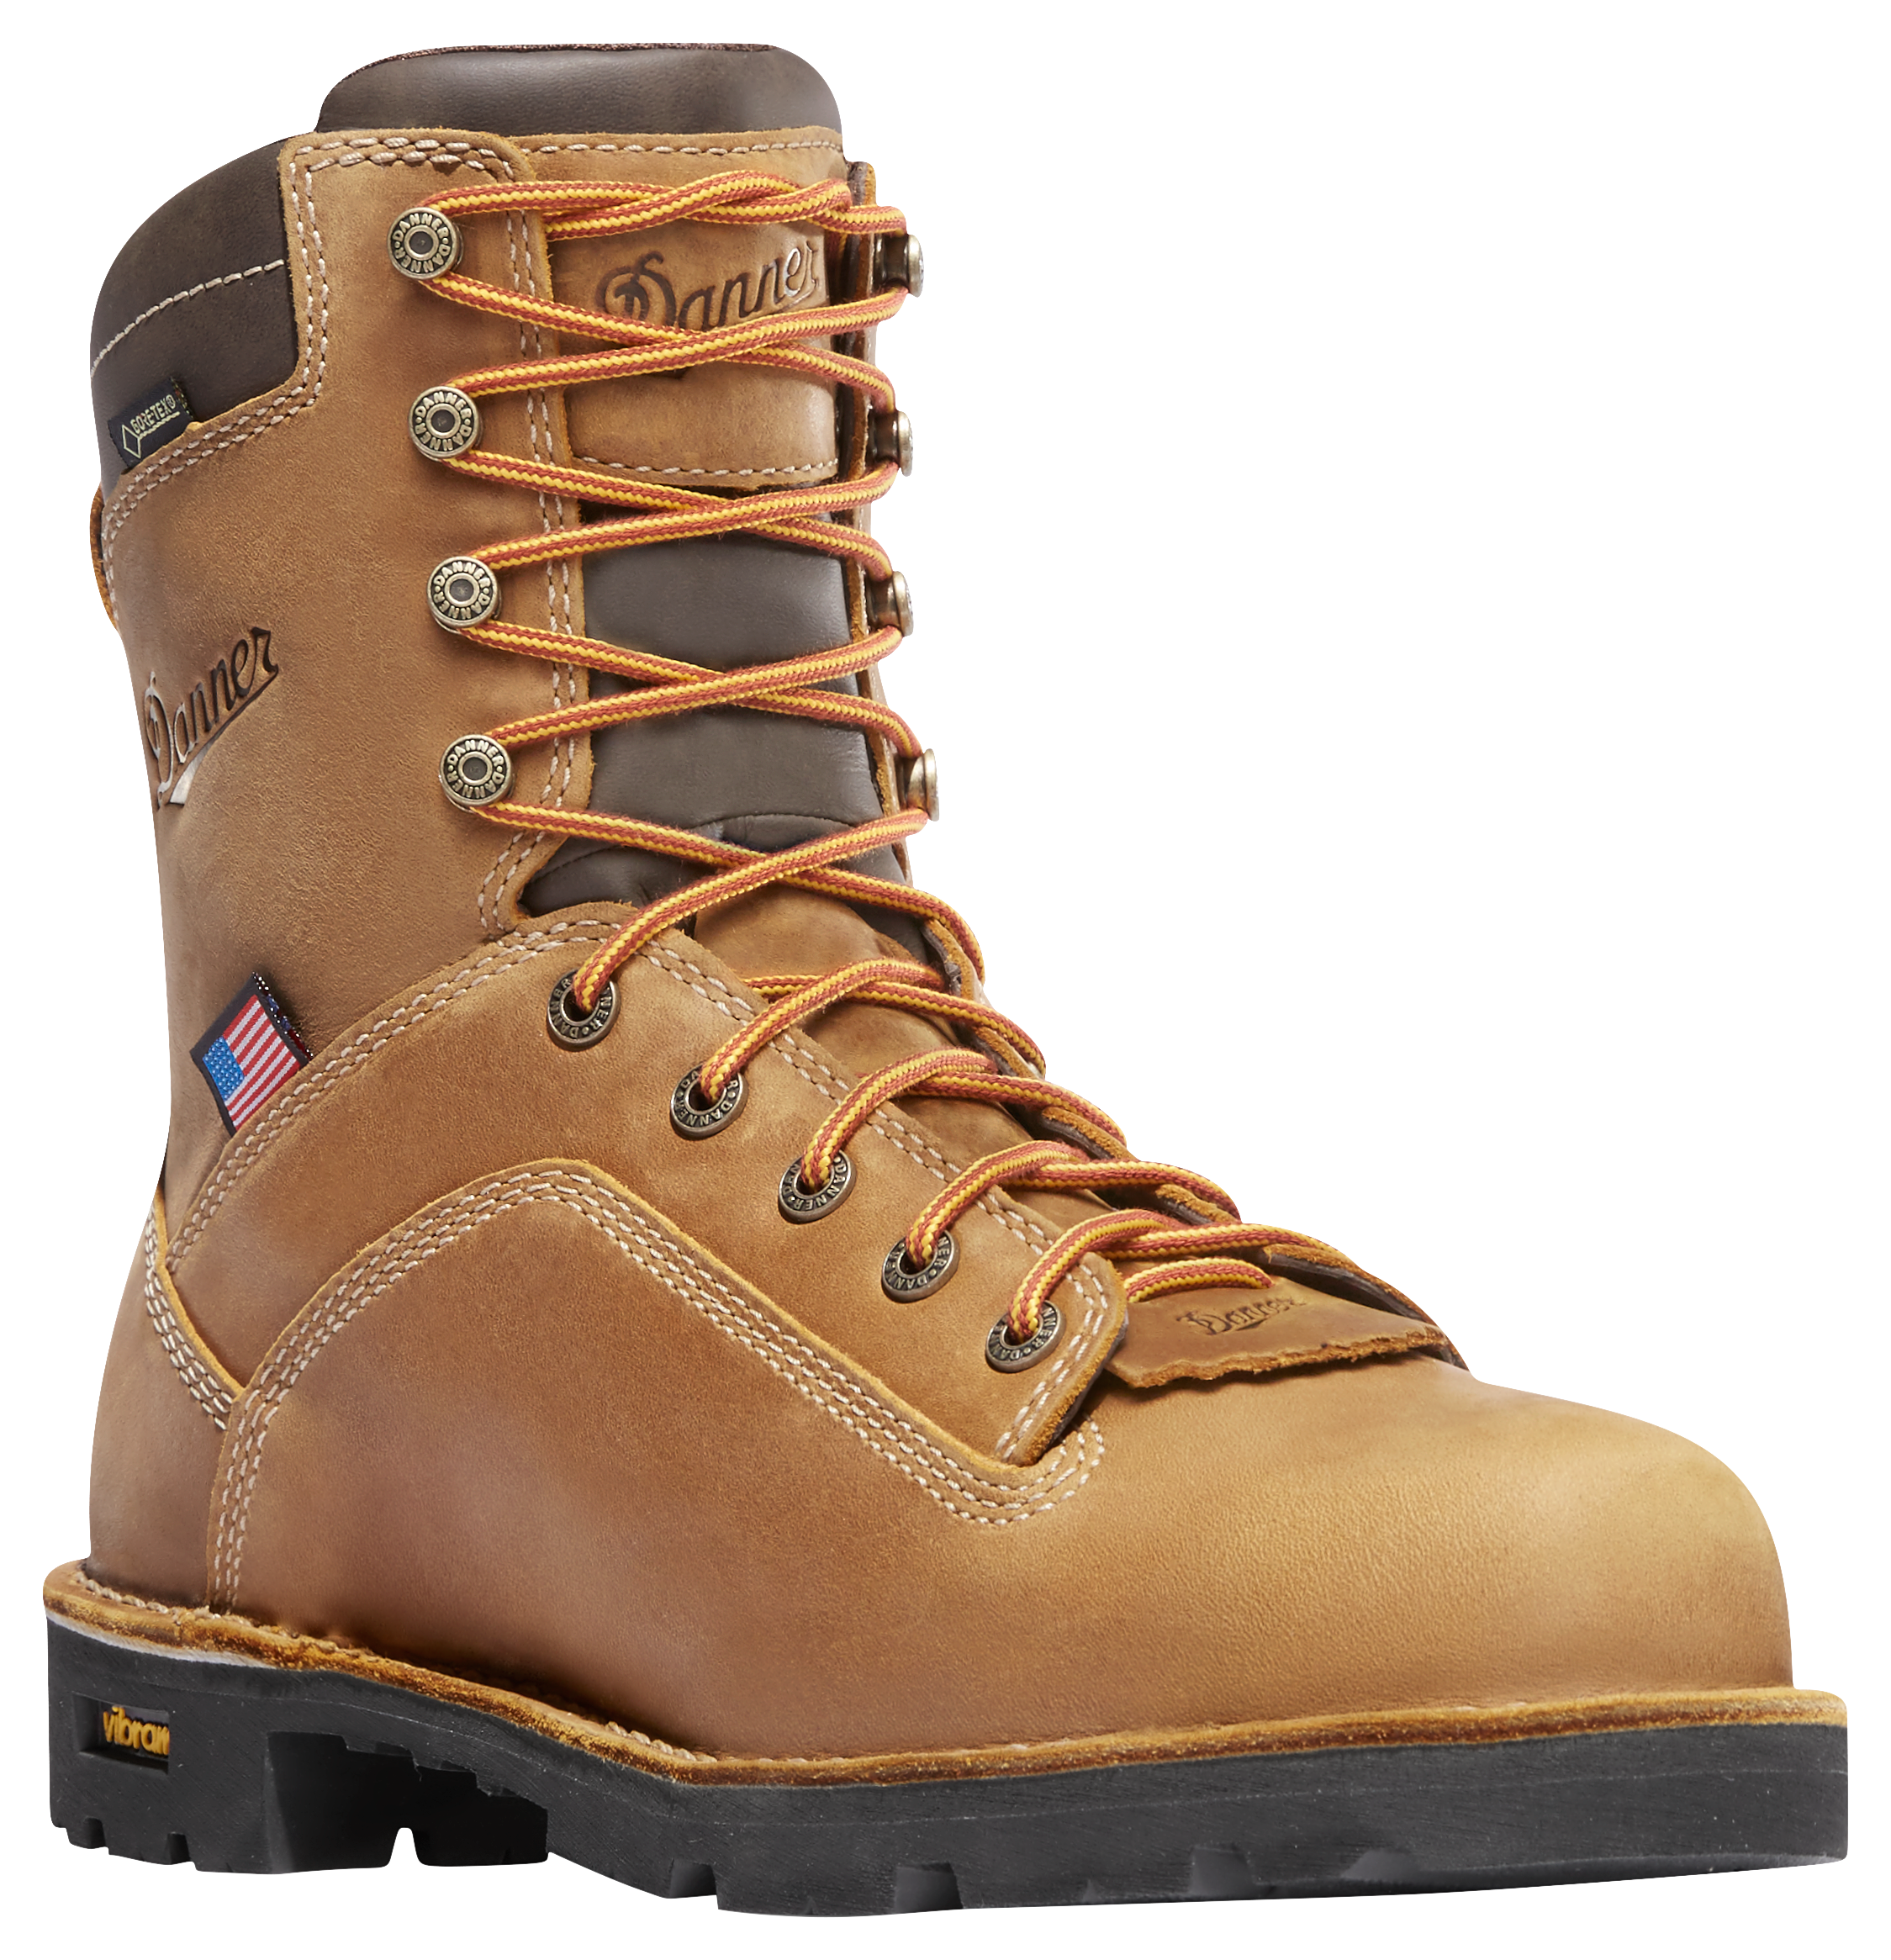 Danner Quarry USA GORE-TEX Insulated Work Boots for Men - Distress Brown - 7M